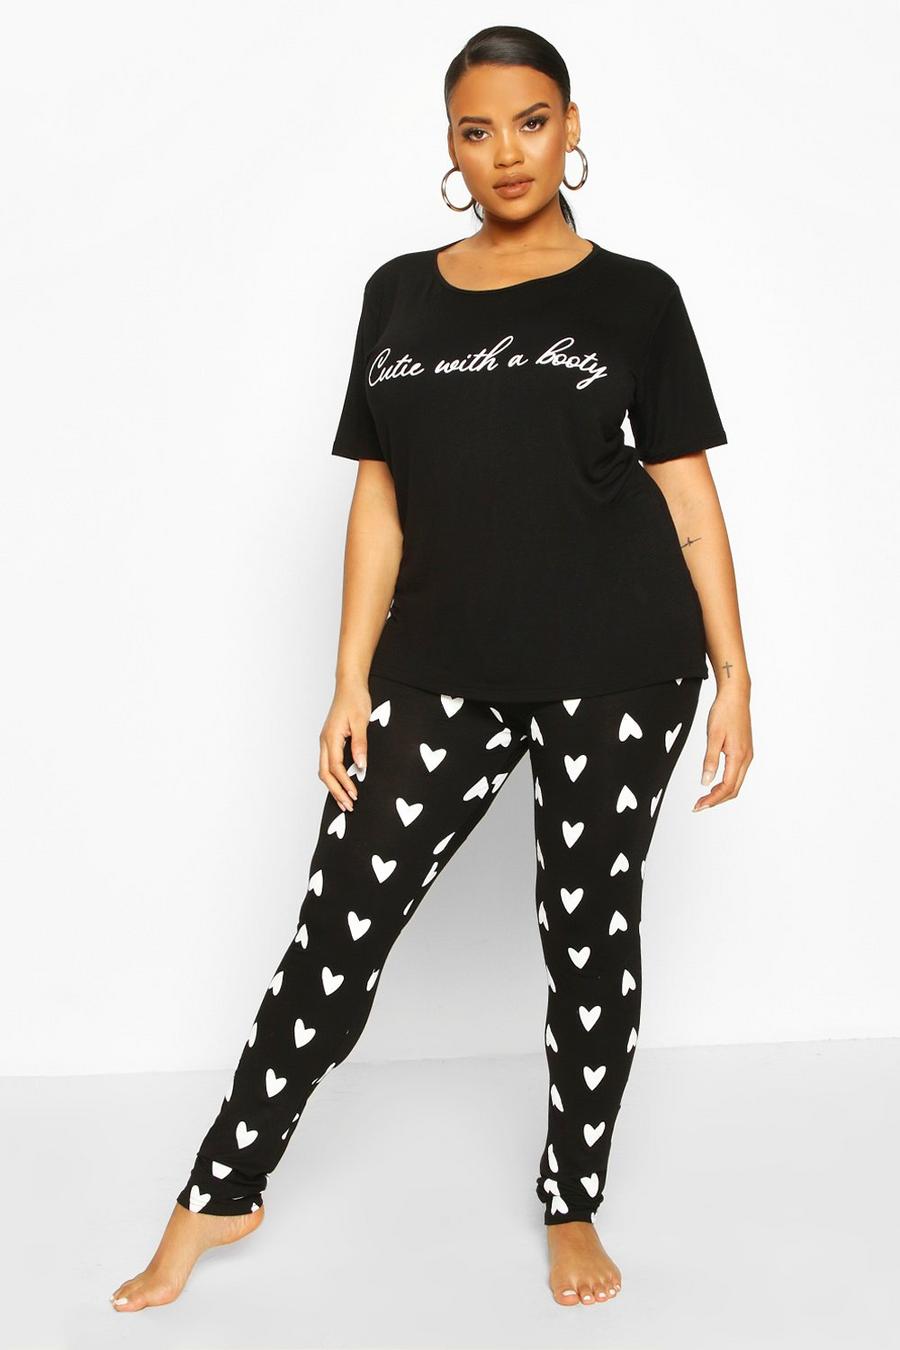 Black Plus 'Cutie With A Booty' Slogan Top & Heart Print Trousers Pyjama Set image number 1